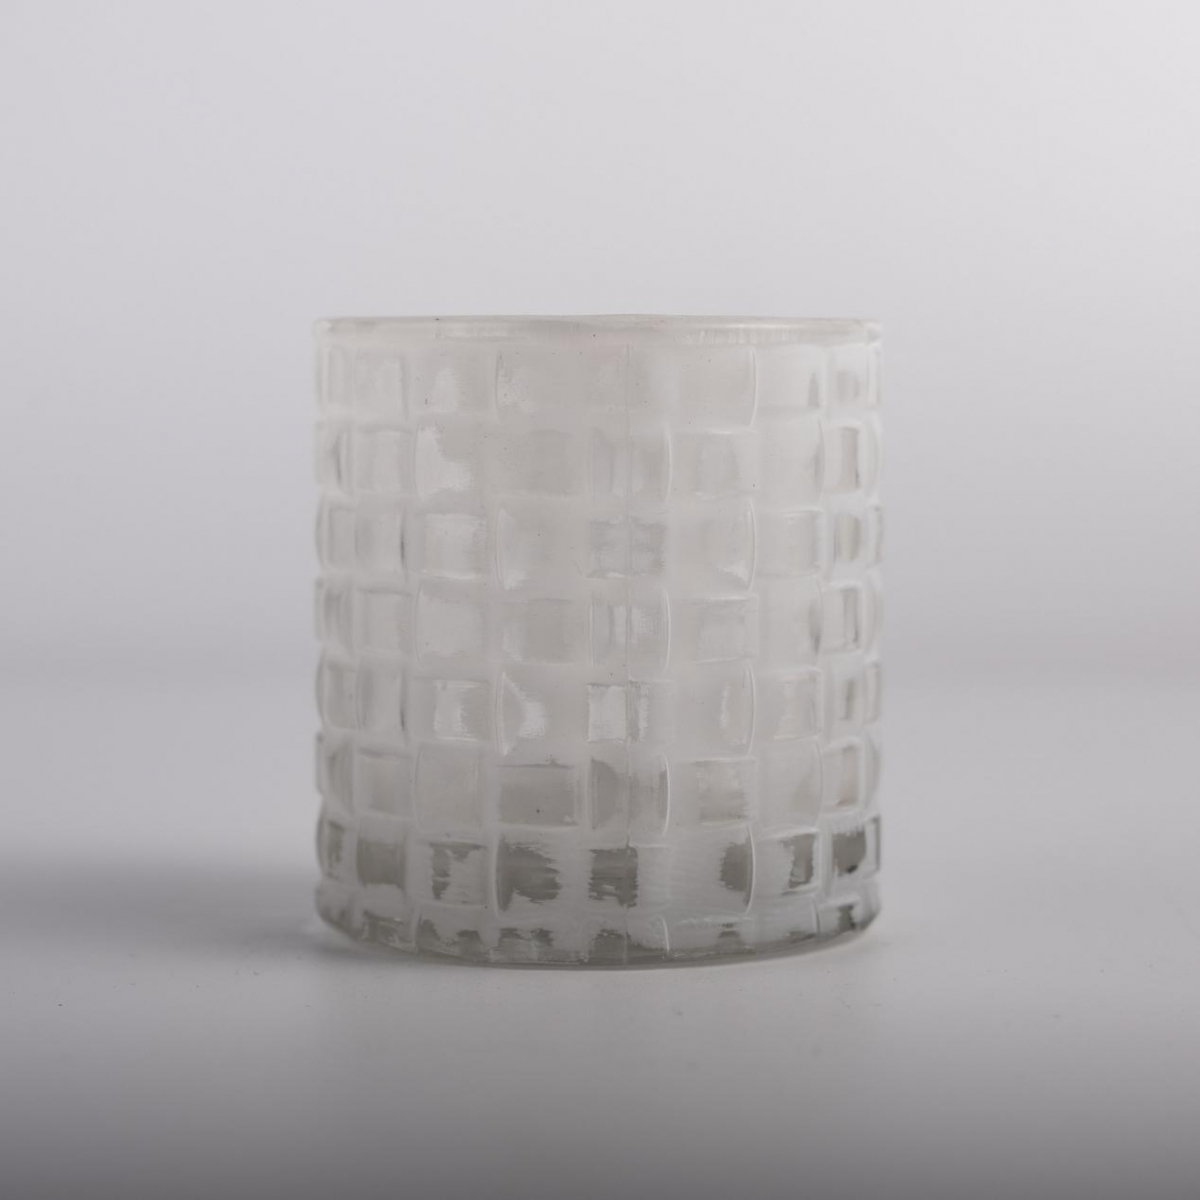 Candle Holder :Rattan Weave Glass Jar , Polished Color ,Ceramic White , Home Sweet Home , China Factory , Wholesale Price-HOWCANDLE-Candles,Scented Candles,Aromatherapy Candles,Soy Candles,Vegan Candles,Jar Candles,Pillar Candles,Candle Gift Sets,Essential Oils,Reed Diffuser,Candle Holder,